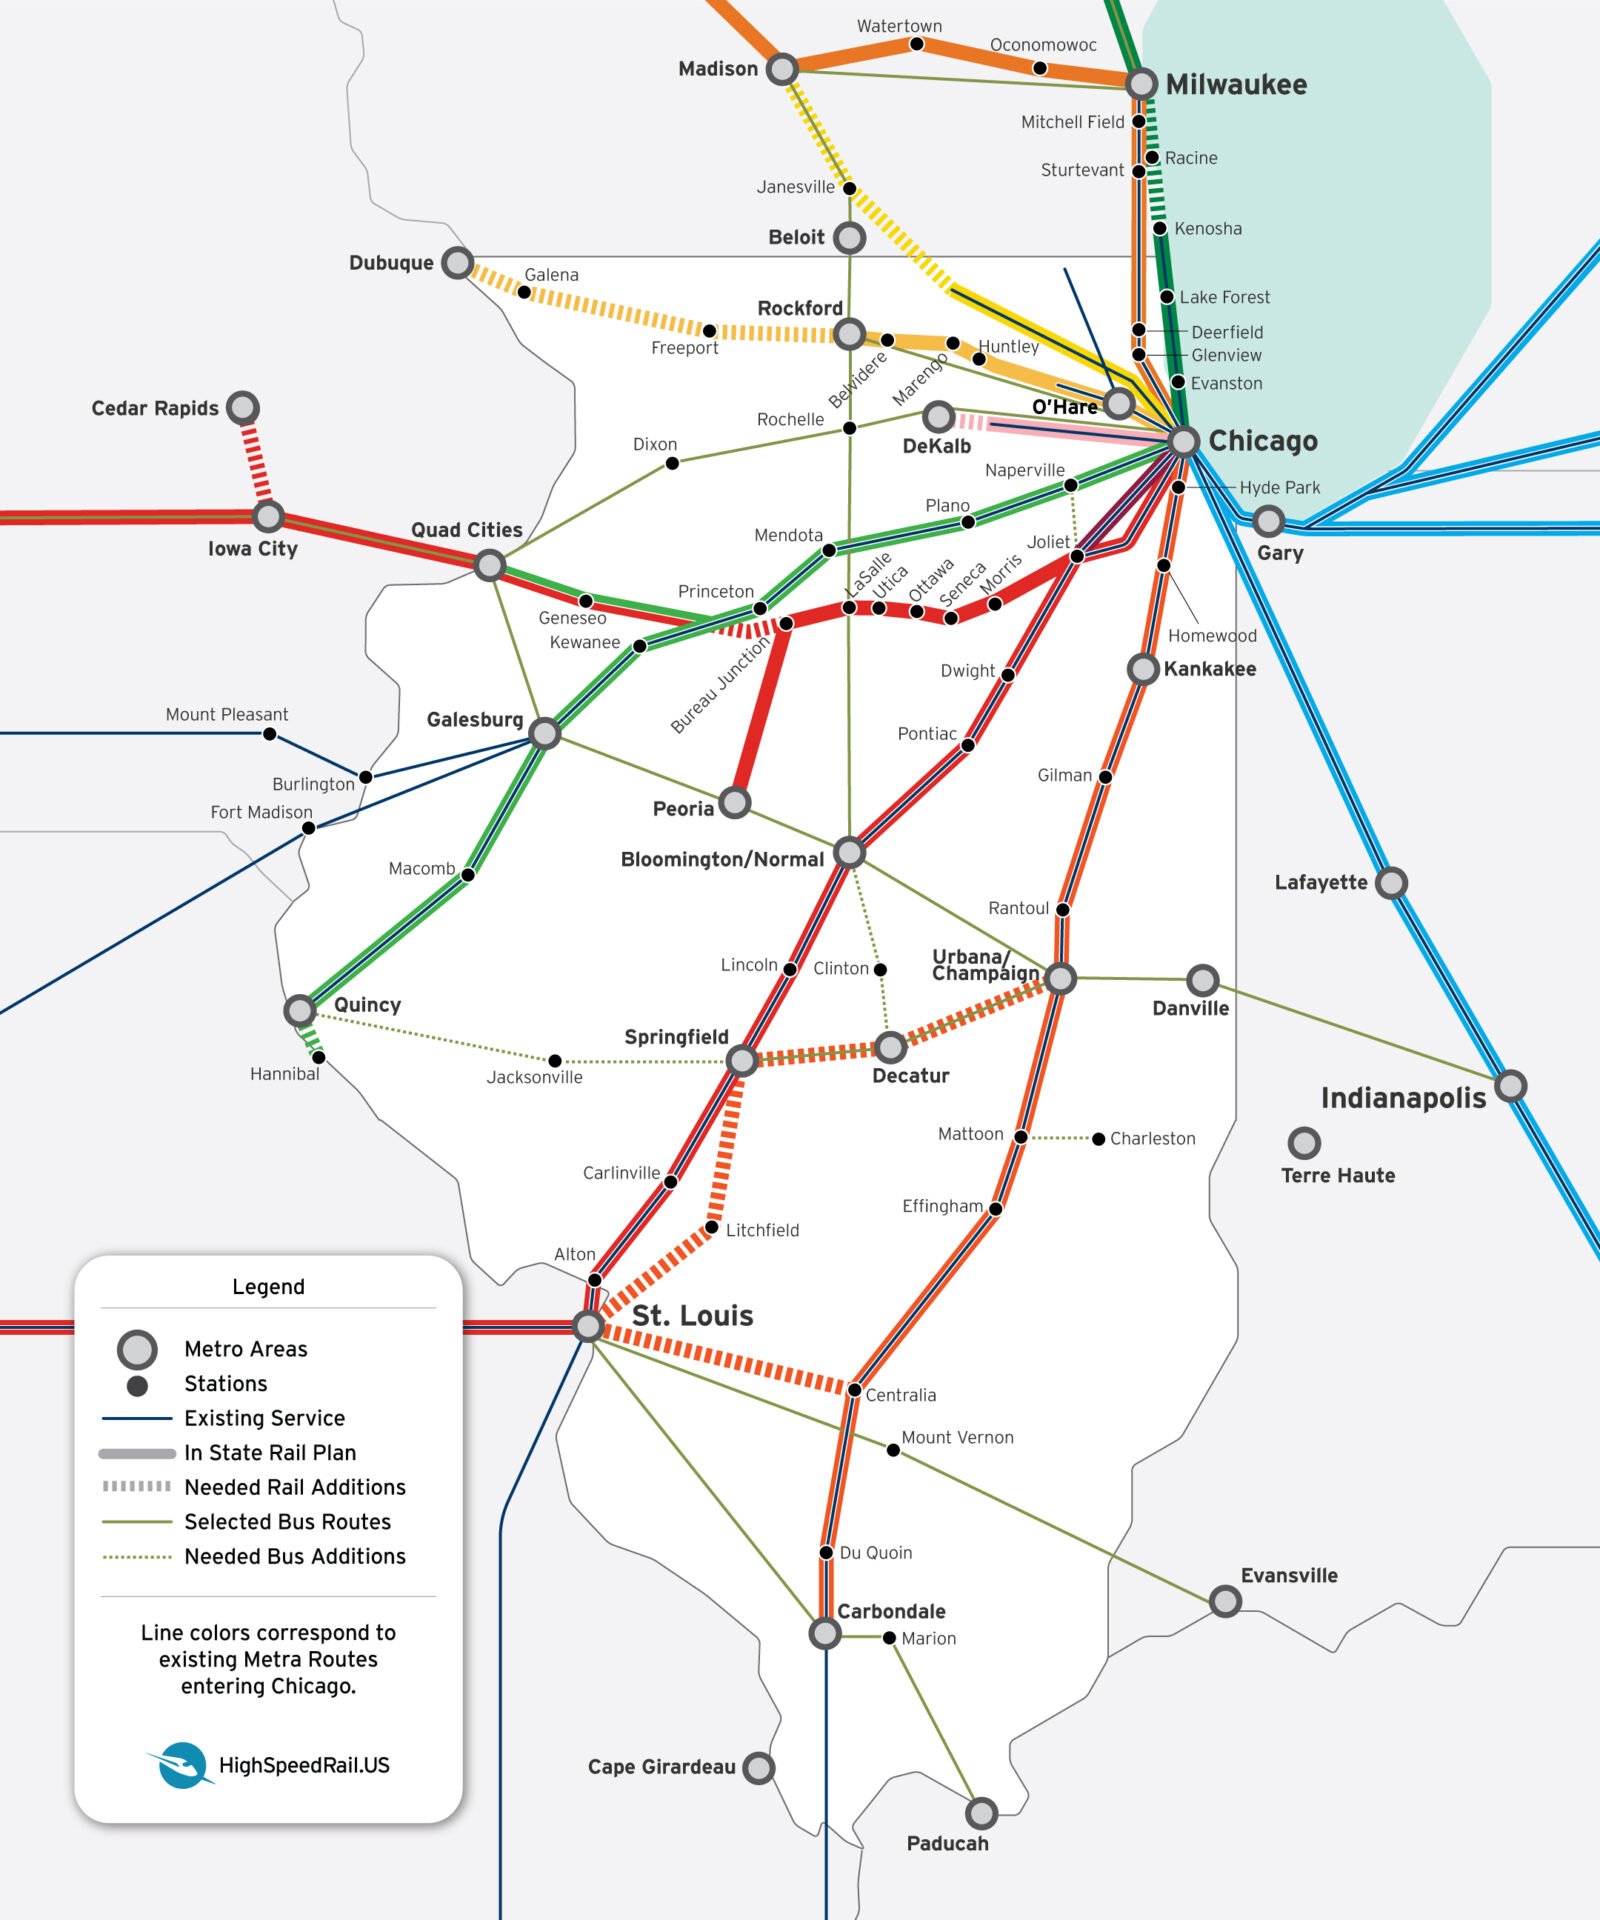 A map showing a potential high-speed and regional rail network connecting all metros in Illinois to each other and to smaller twons.